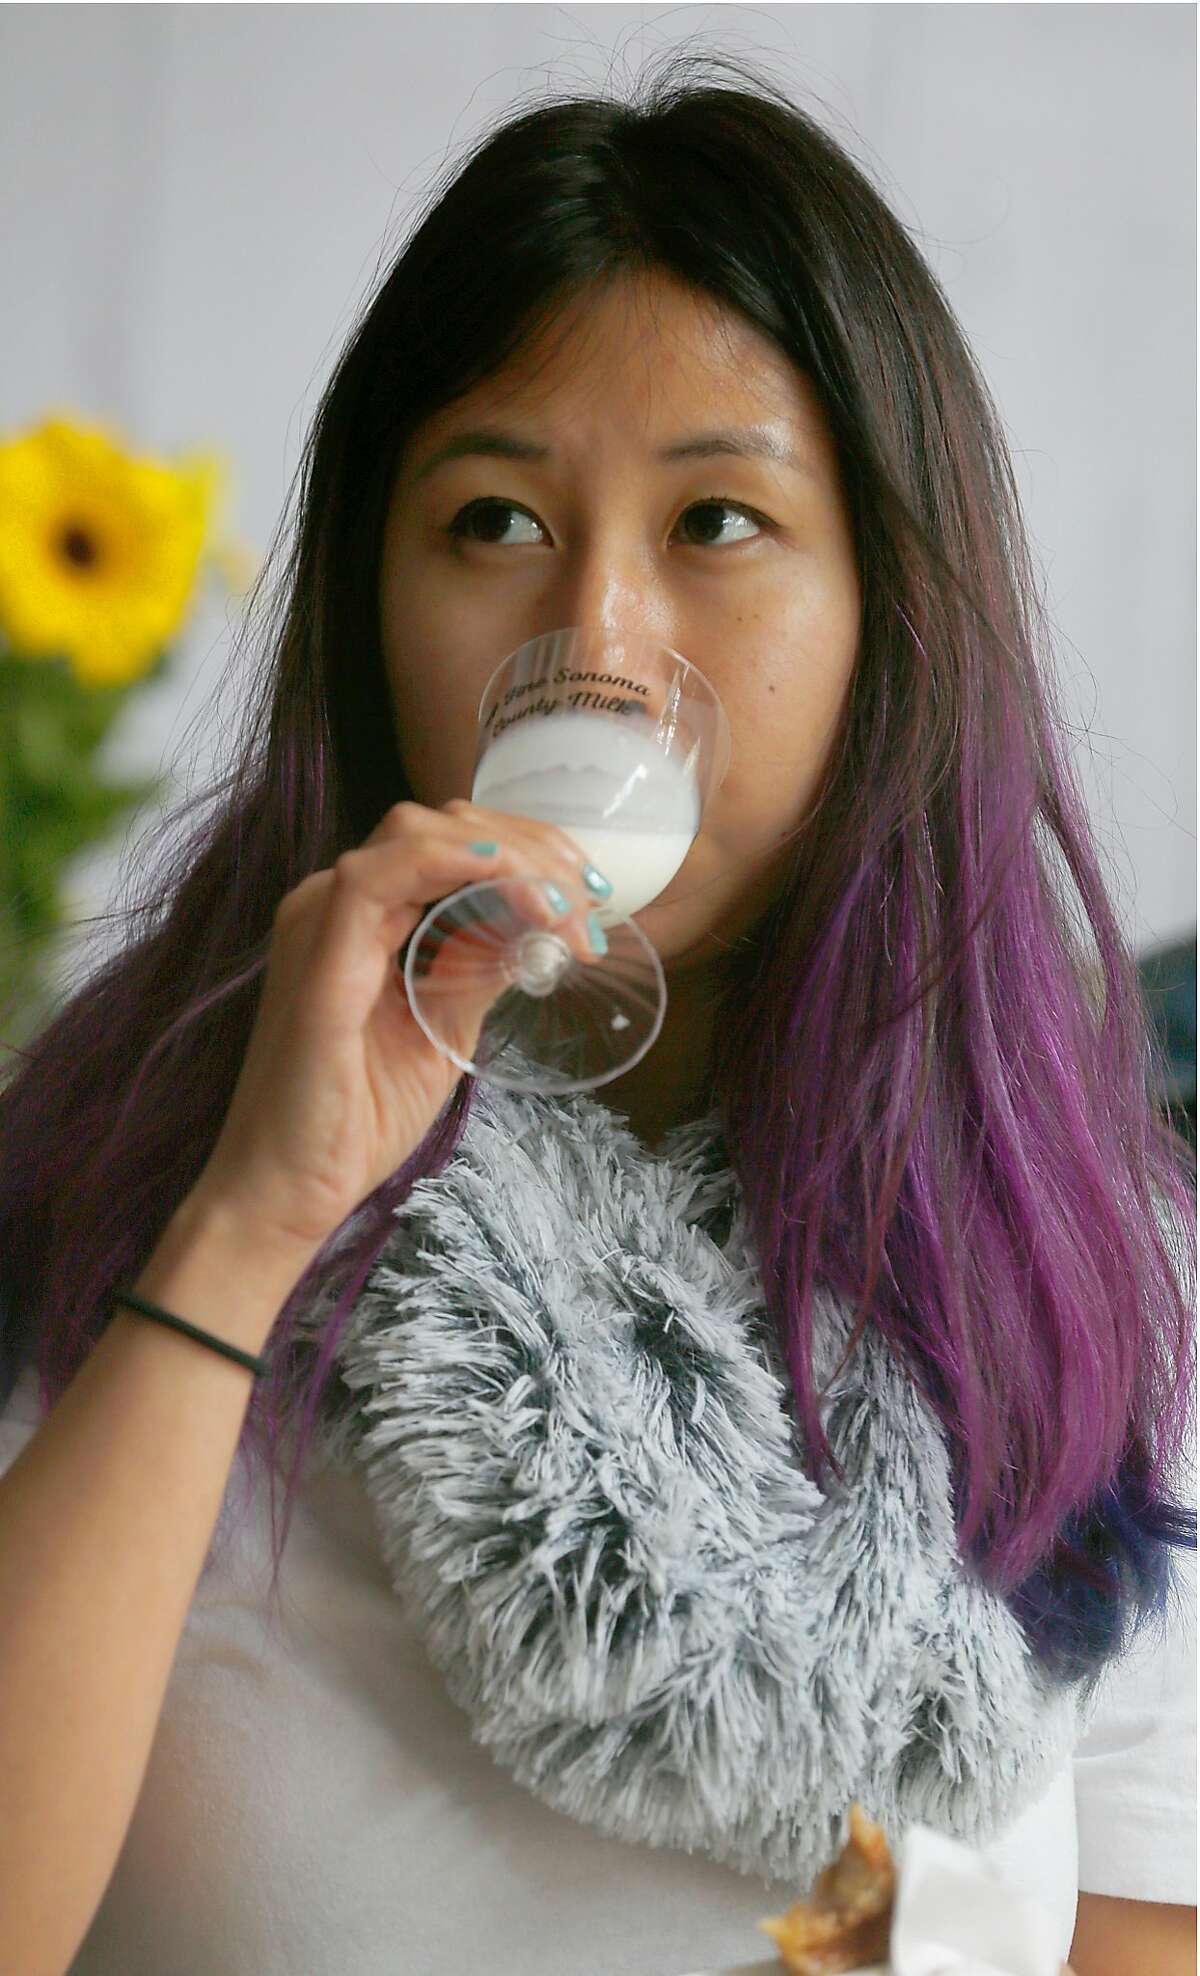 Elizabeth Tseng from San Francisco compares Clover 2% and whole milk as she listens to world�s first milk somoo'lier, Bas de Groot, holding a milk tasting session via Skype at the Clover Milk Tasting Room pop-up in Hayes Valley on Wednesday, June 28, 2017, in San Francisco, Calif.